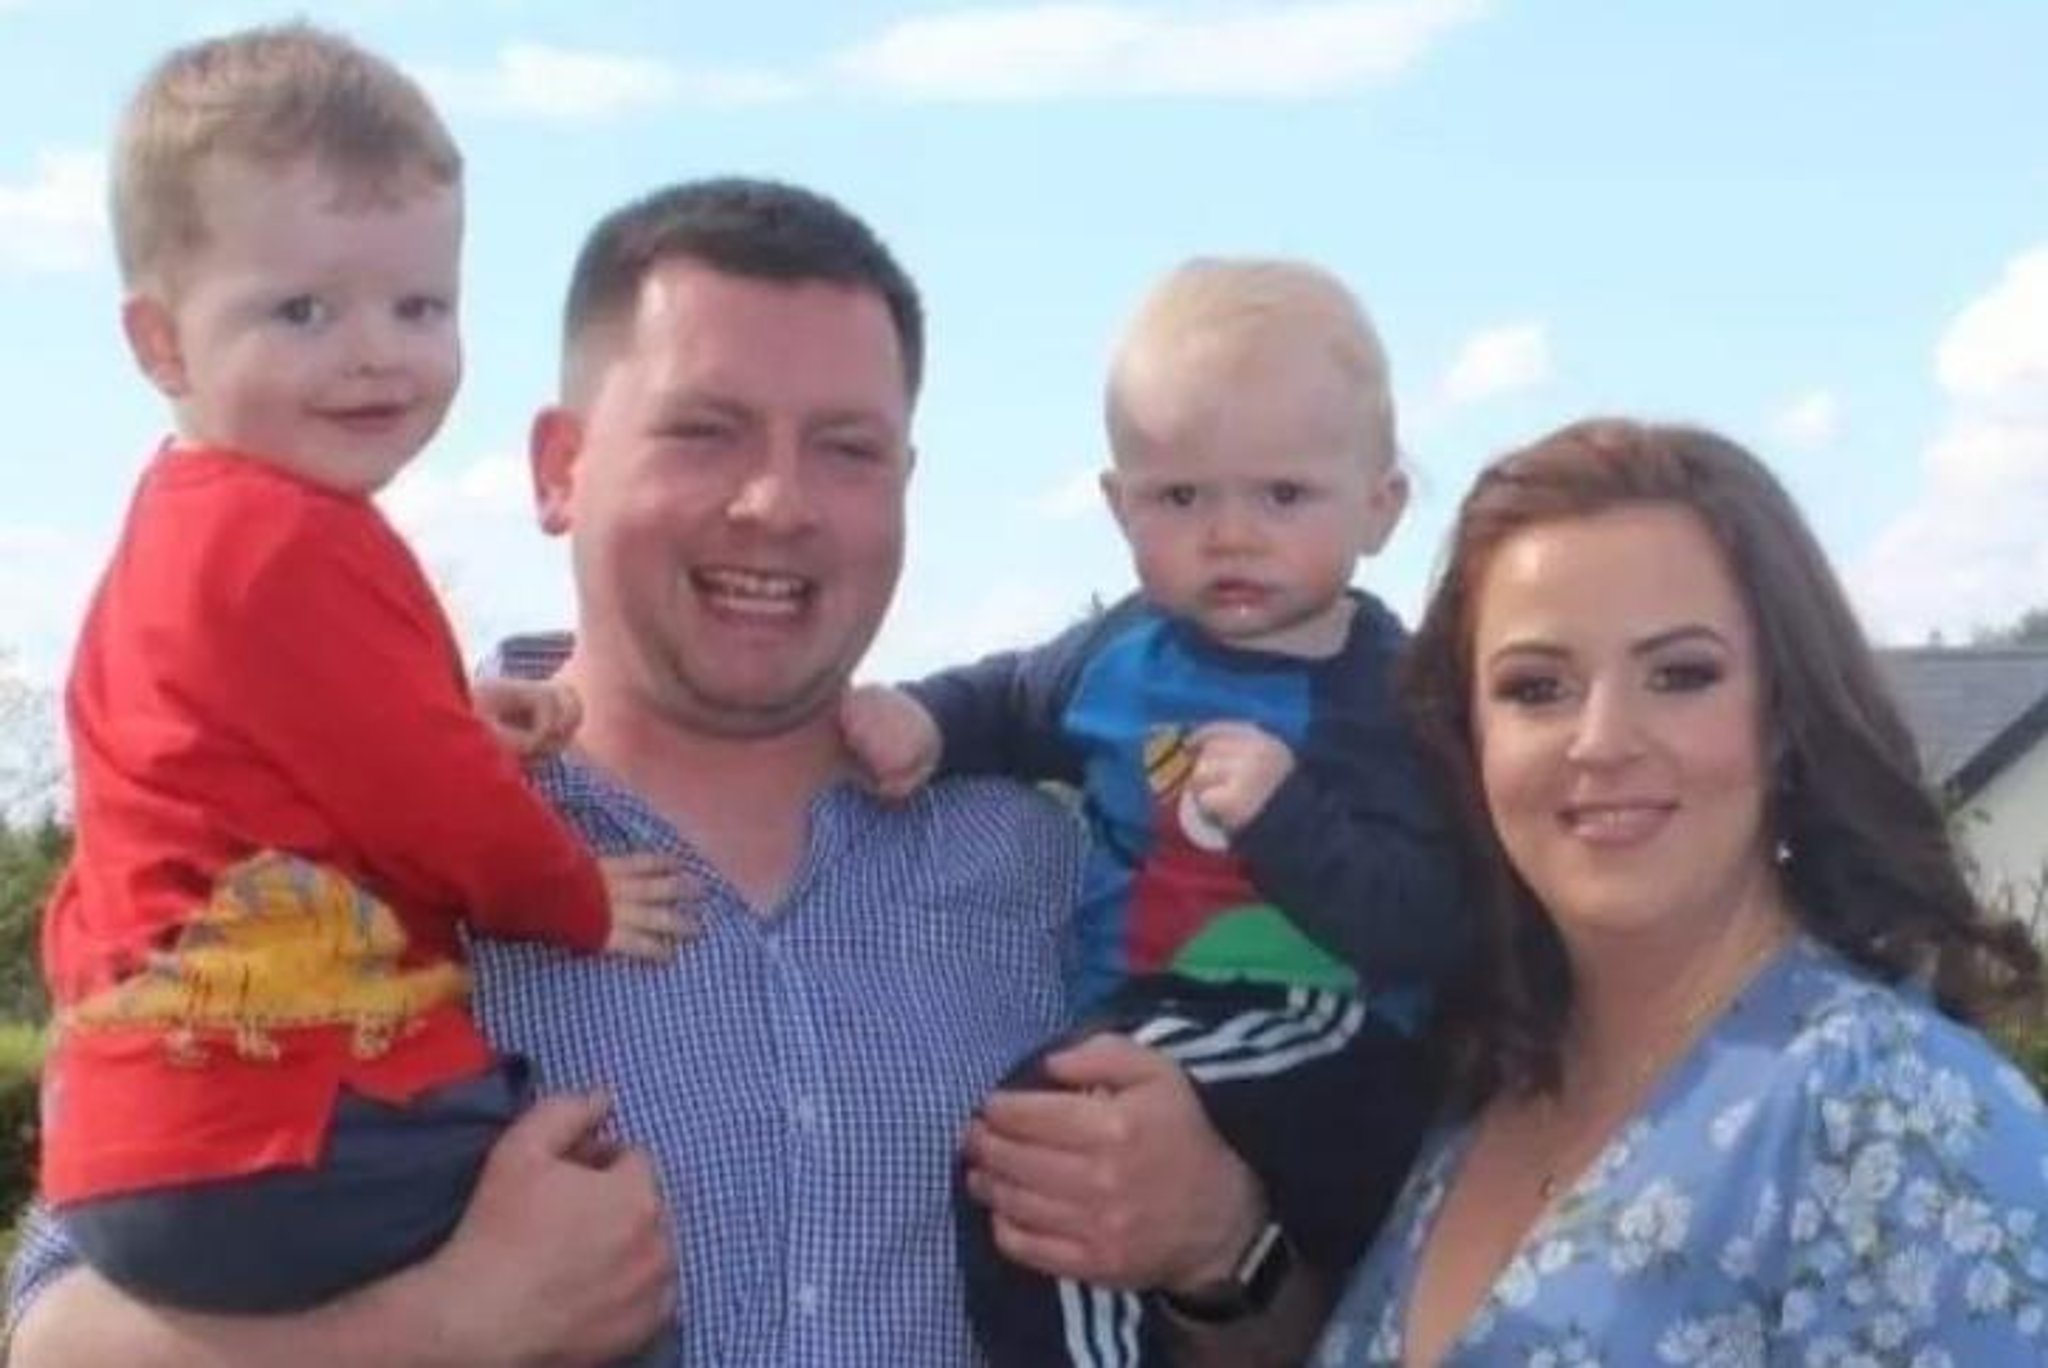 UPDATE: Husband of tragic NI mum-of-two confirms she remains in ICU on ventilator 'unable to speak or eat' after shock diagnosis - GoFundMe has already hit more than £15,000